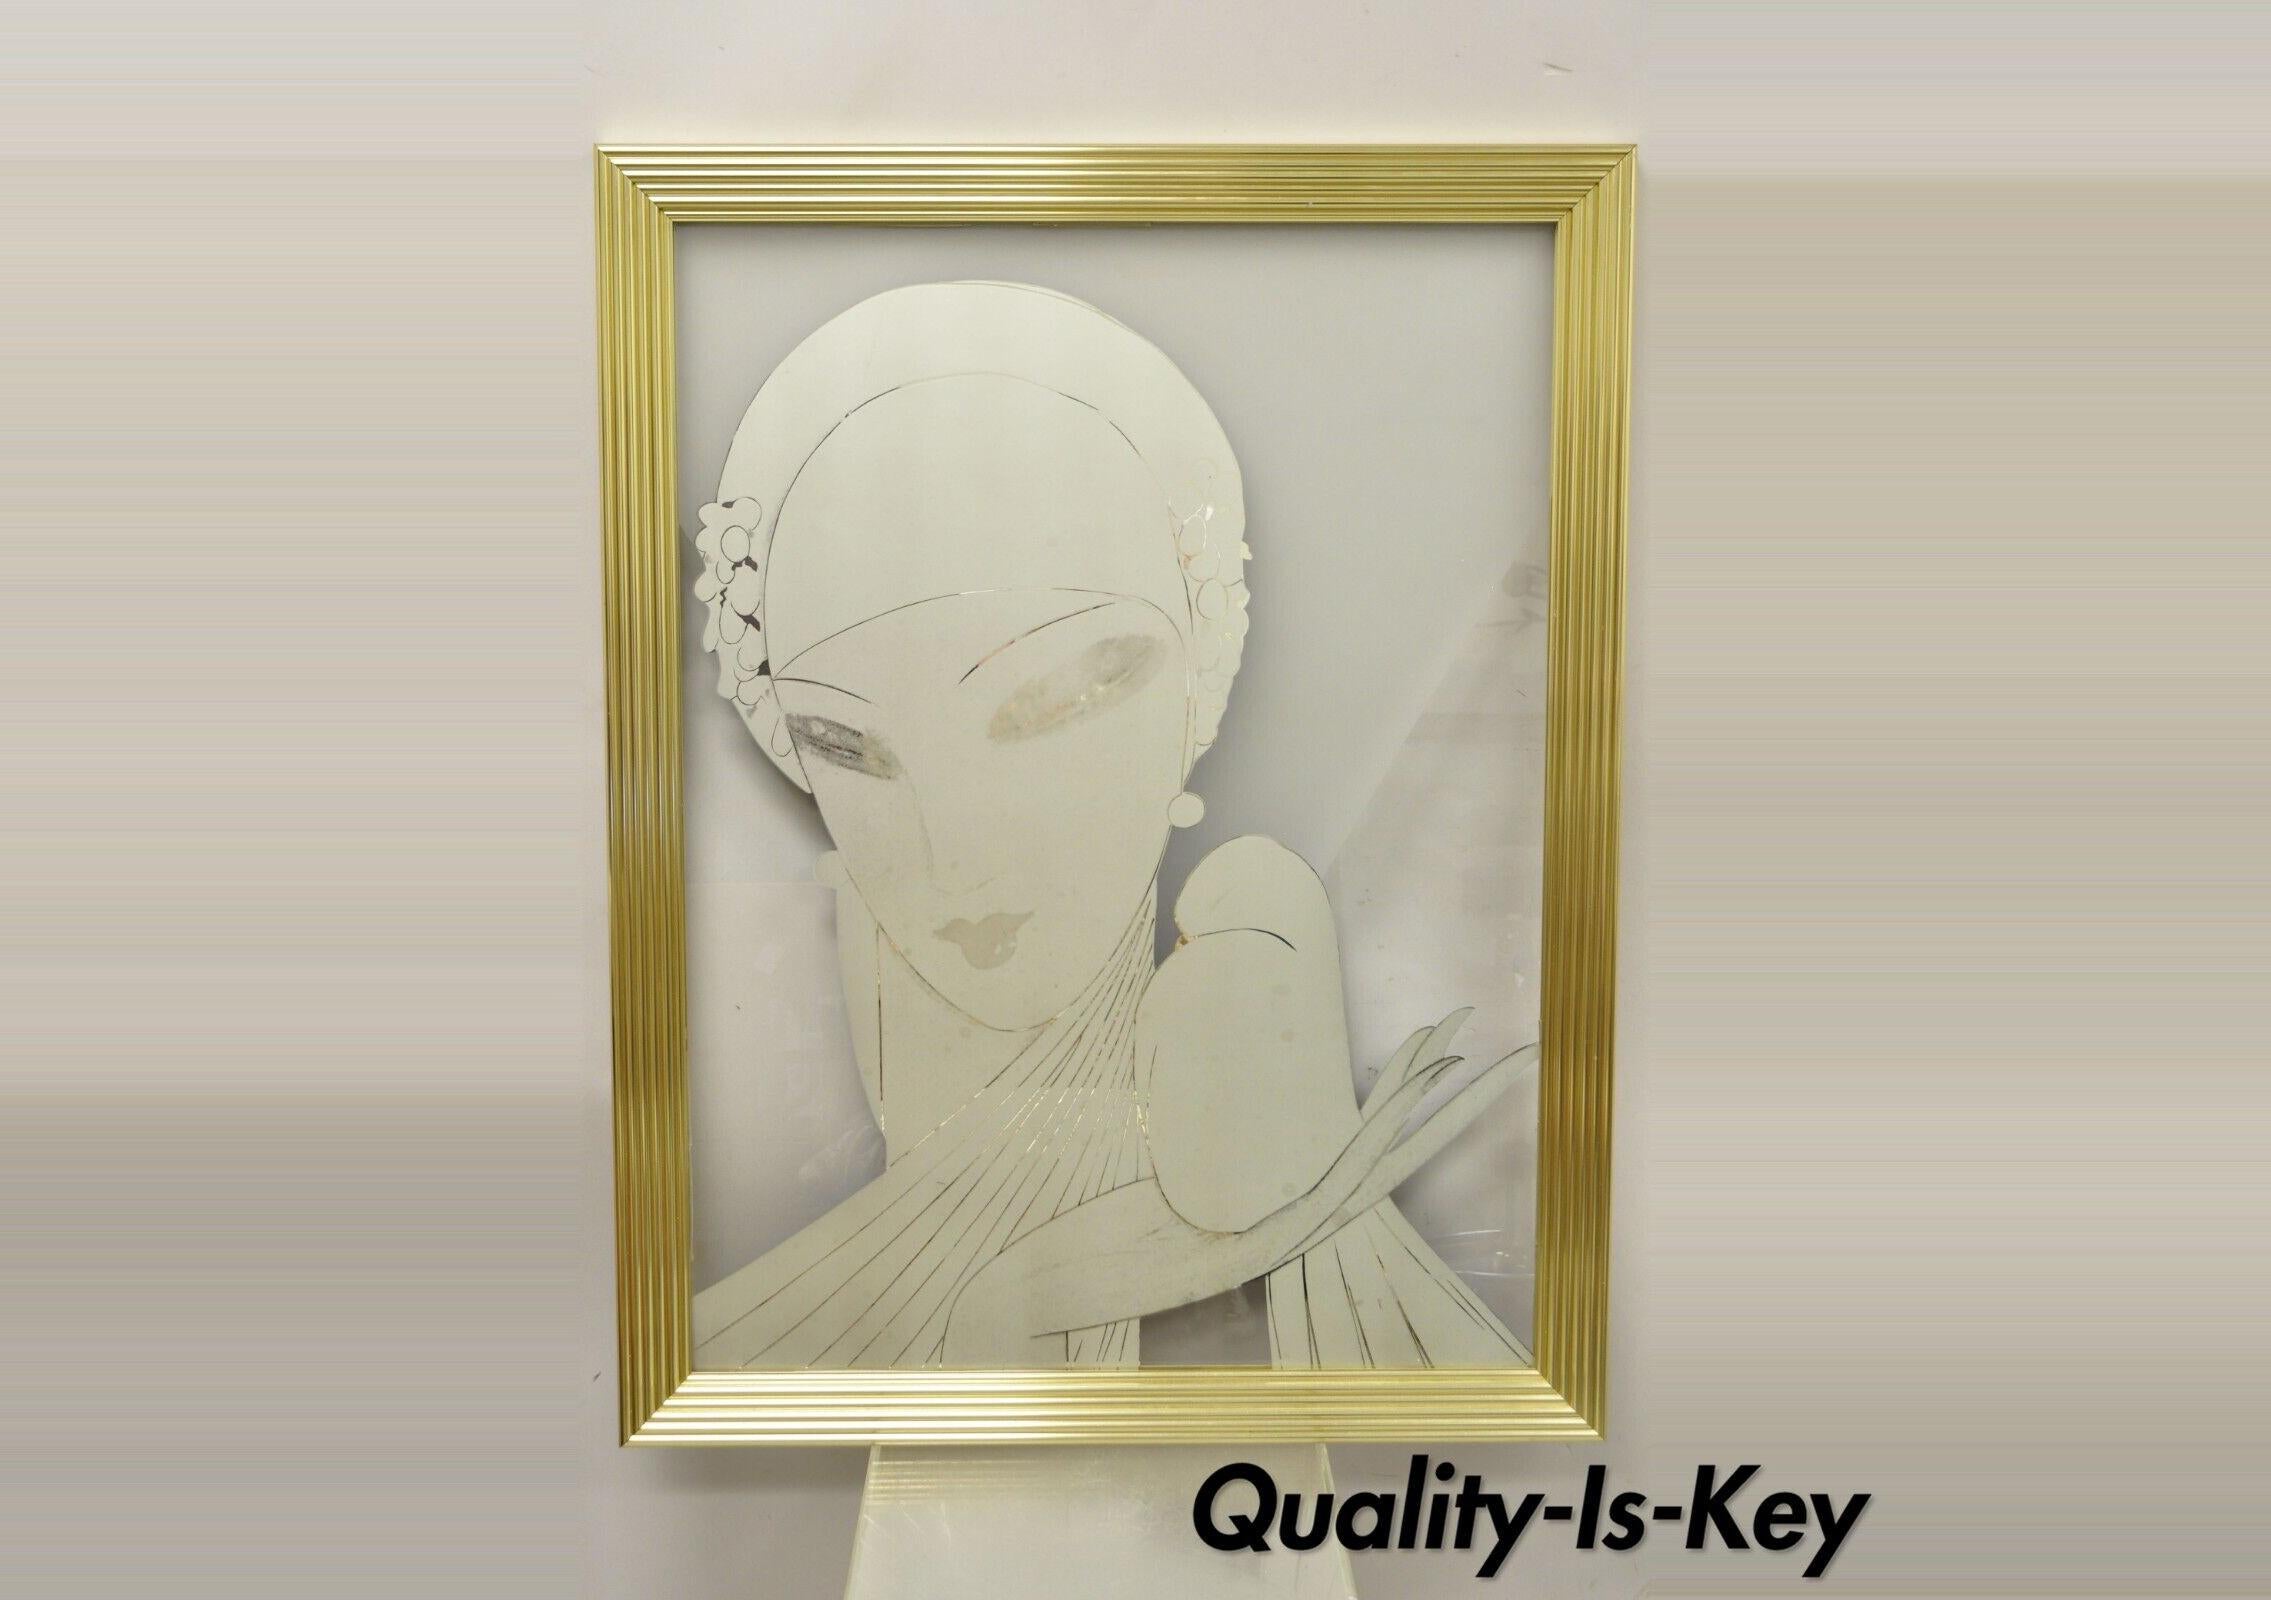 Vintage frosted glass art deco style brass framed academy arts mid century wall art by Intercraft Industries Corp. Item features frosted glass etching of Art Deco woman with dove bird, brass frame, original label, great style and form. Circa 1970s.